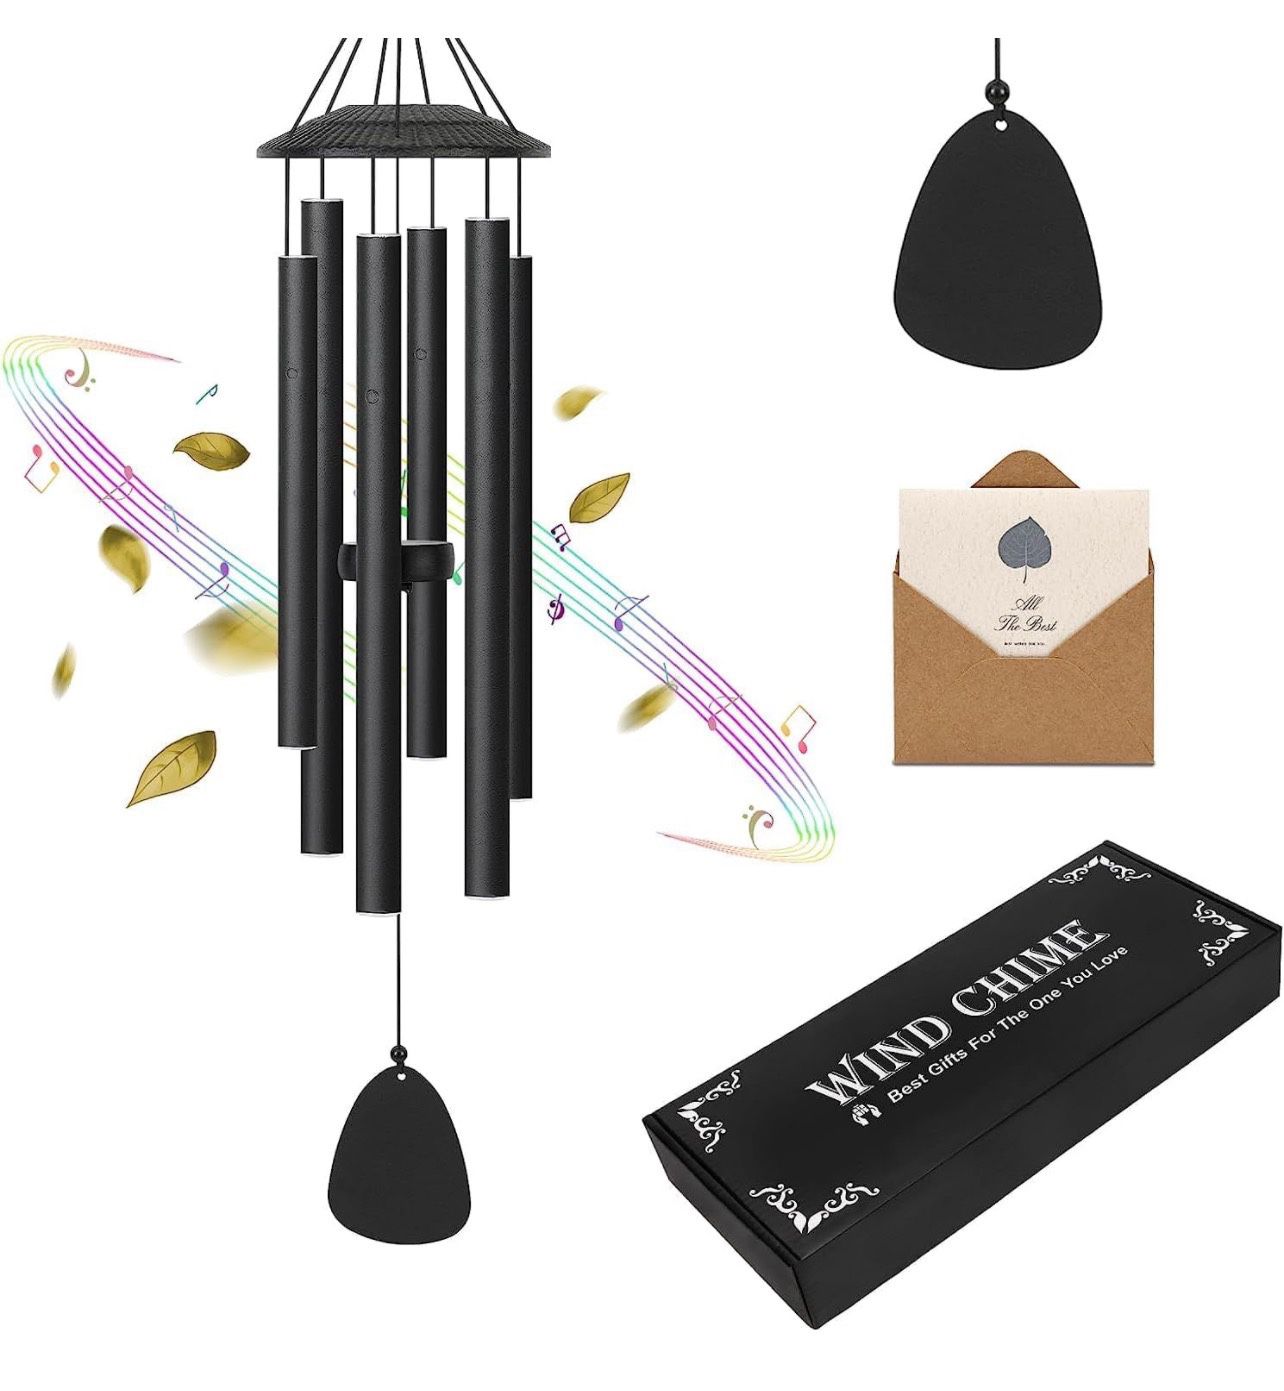 Outdoor Memorial Wind Chimes for Soothing Garden Decor and Sympathy Gifts - Large Deep Tone Melodic Tones - Best Gift for Mom, Women, Grandma, Neighbo